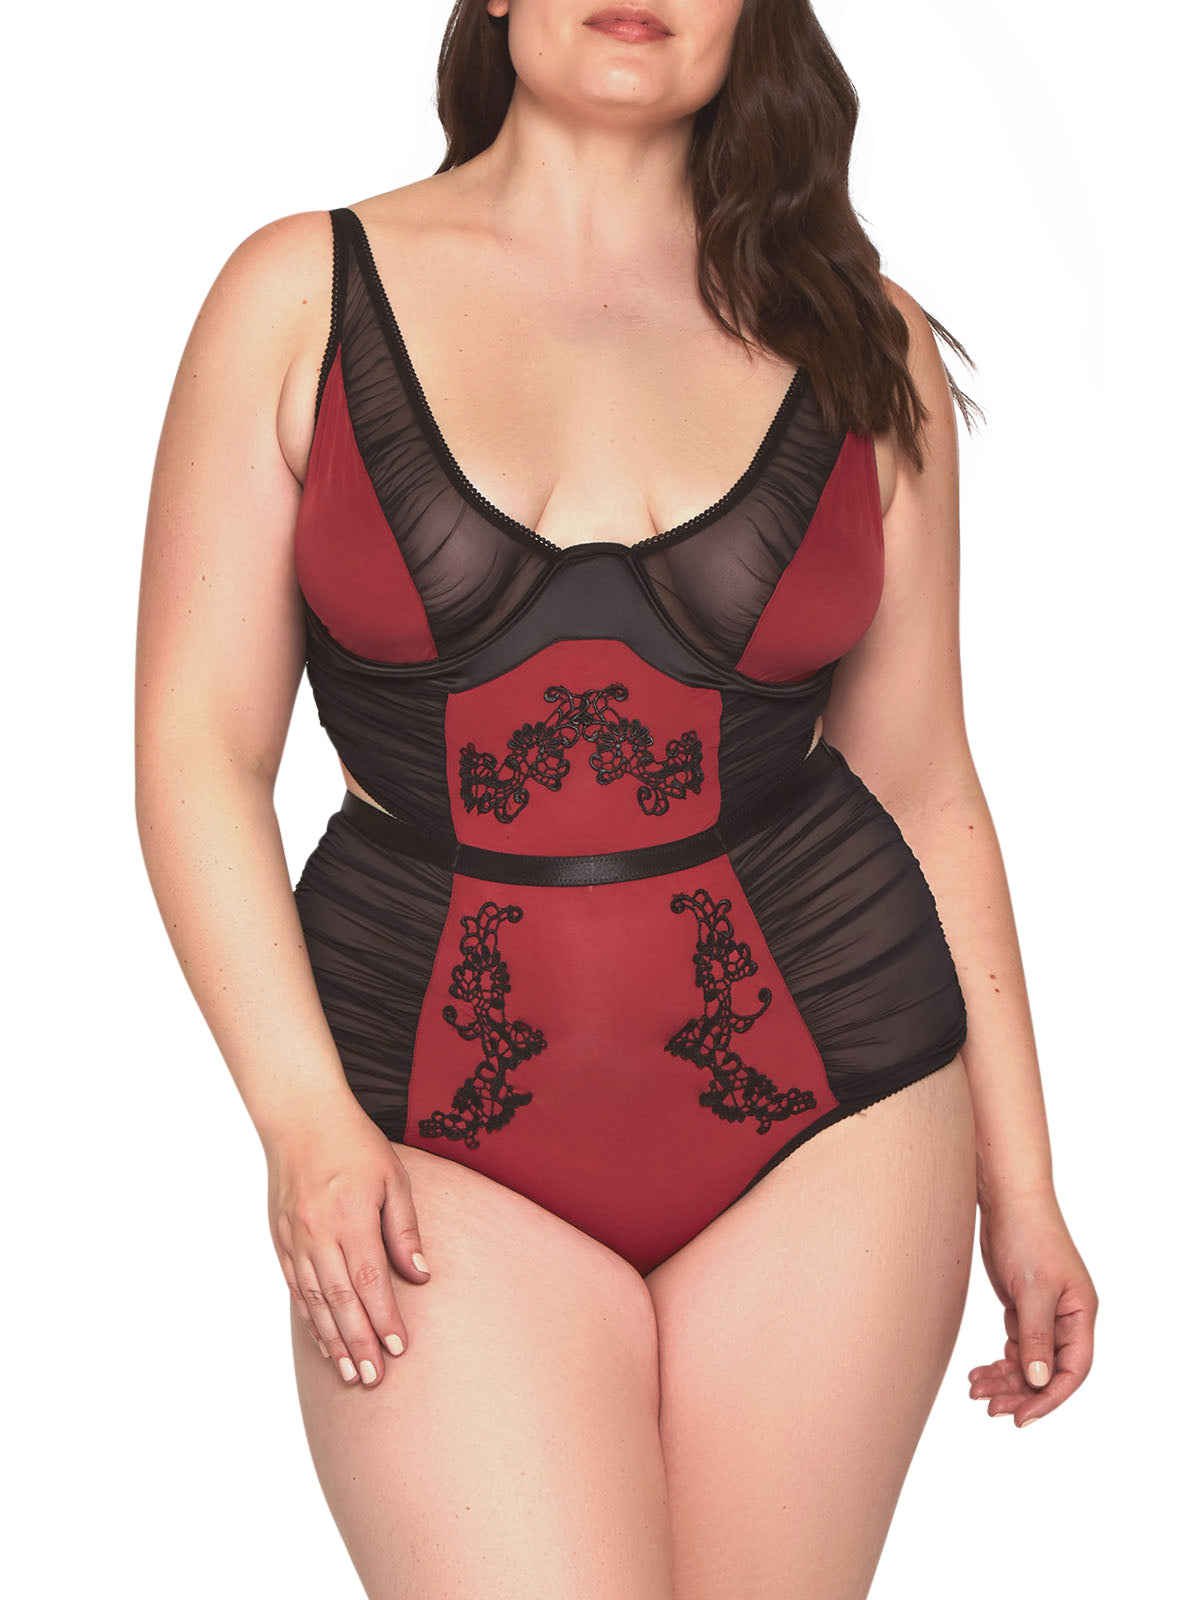 iCollection Plus Size Teddy Notte Plus Size Teddy